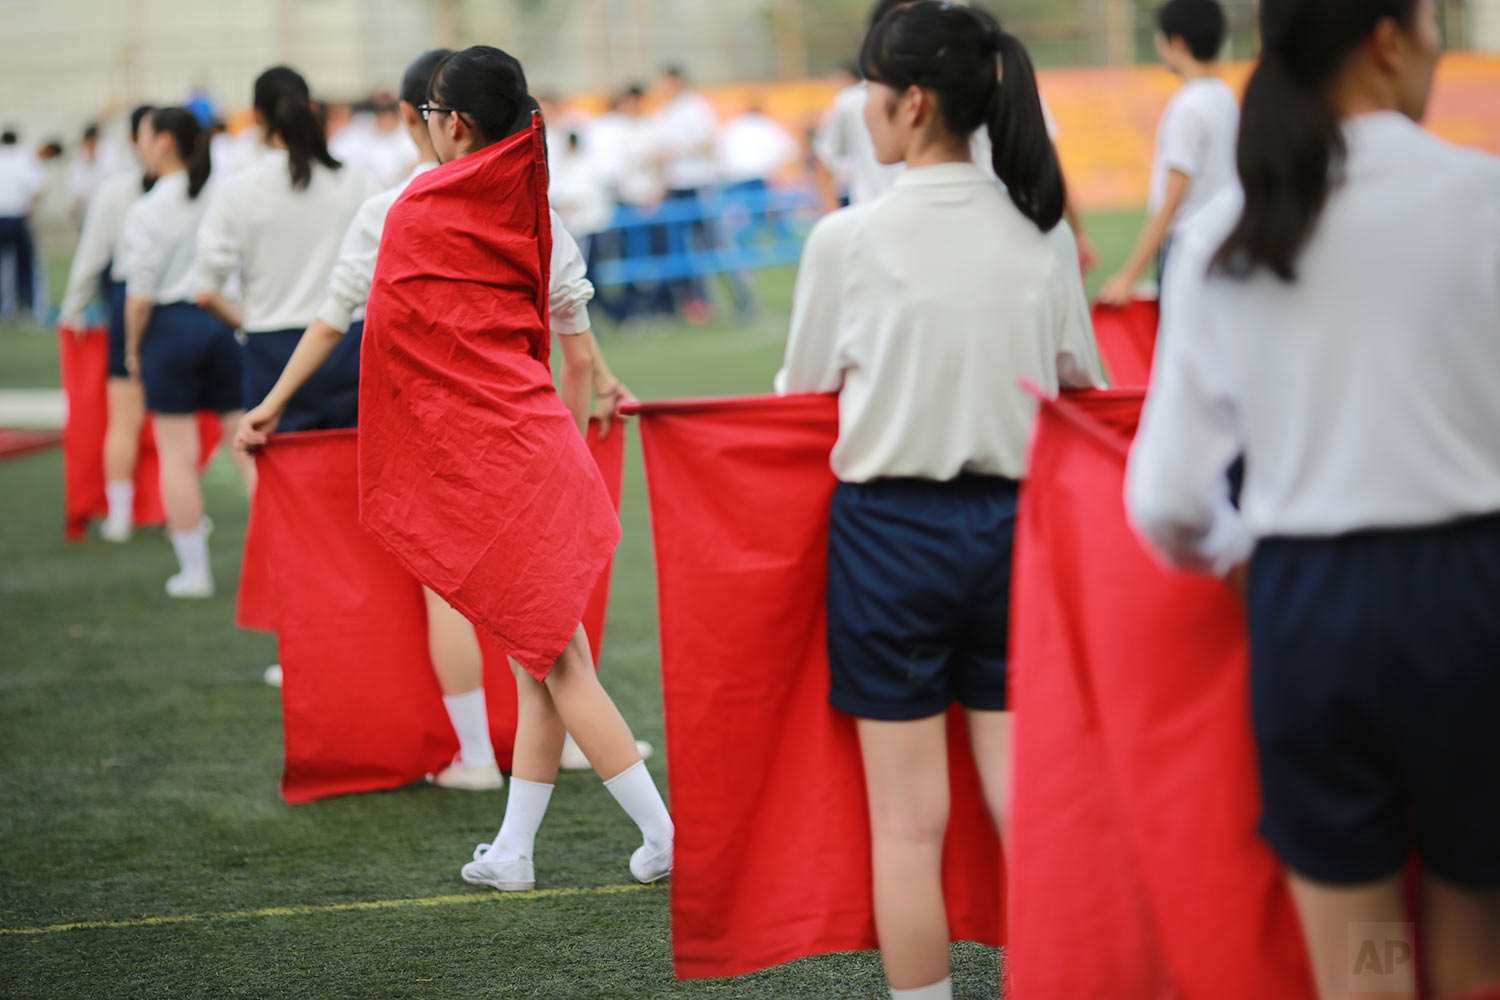  In this Sept. 26, 2017, photo, students practice flag cheering routines at a Korean high school in Tokyo. (AP Photo/Eugene Hoshiko) 